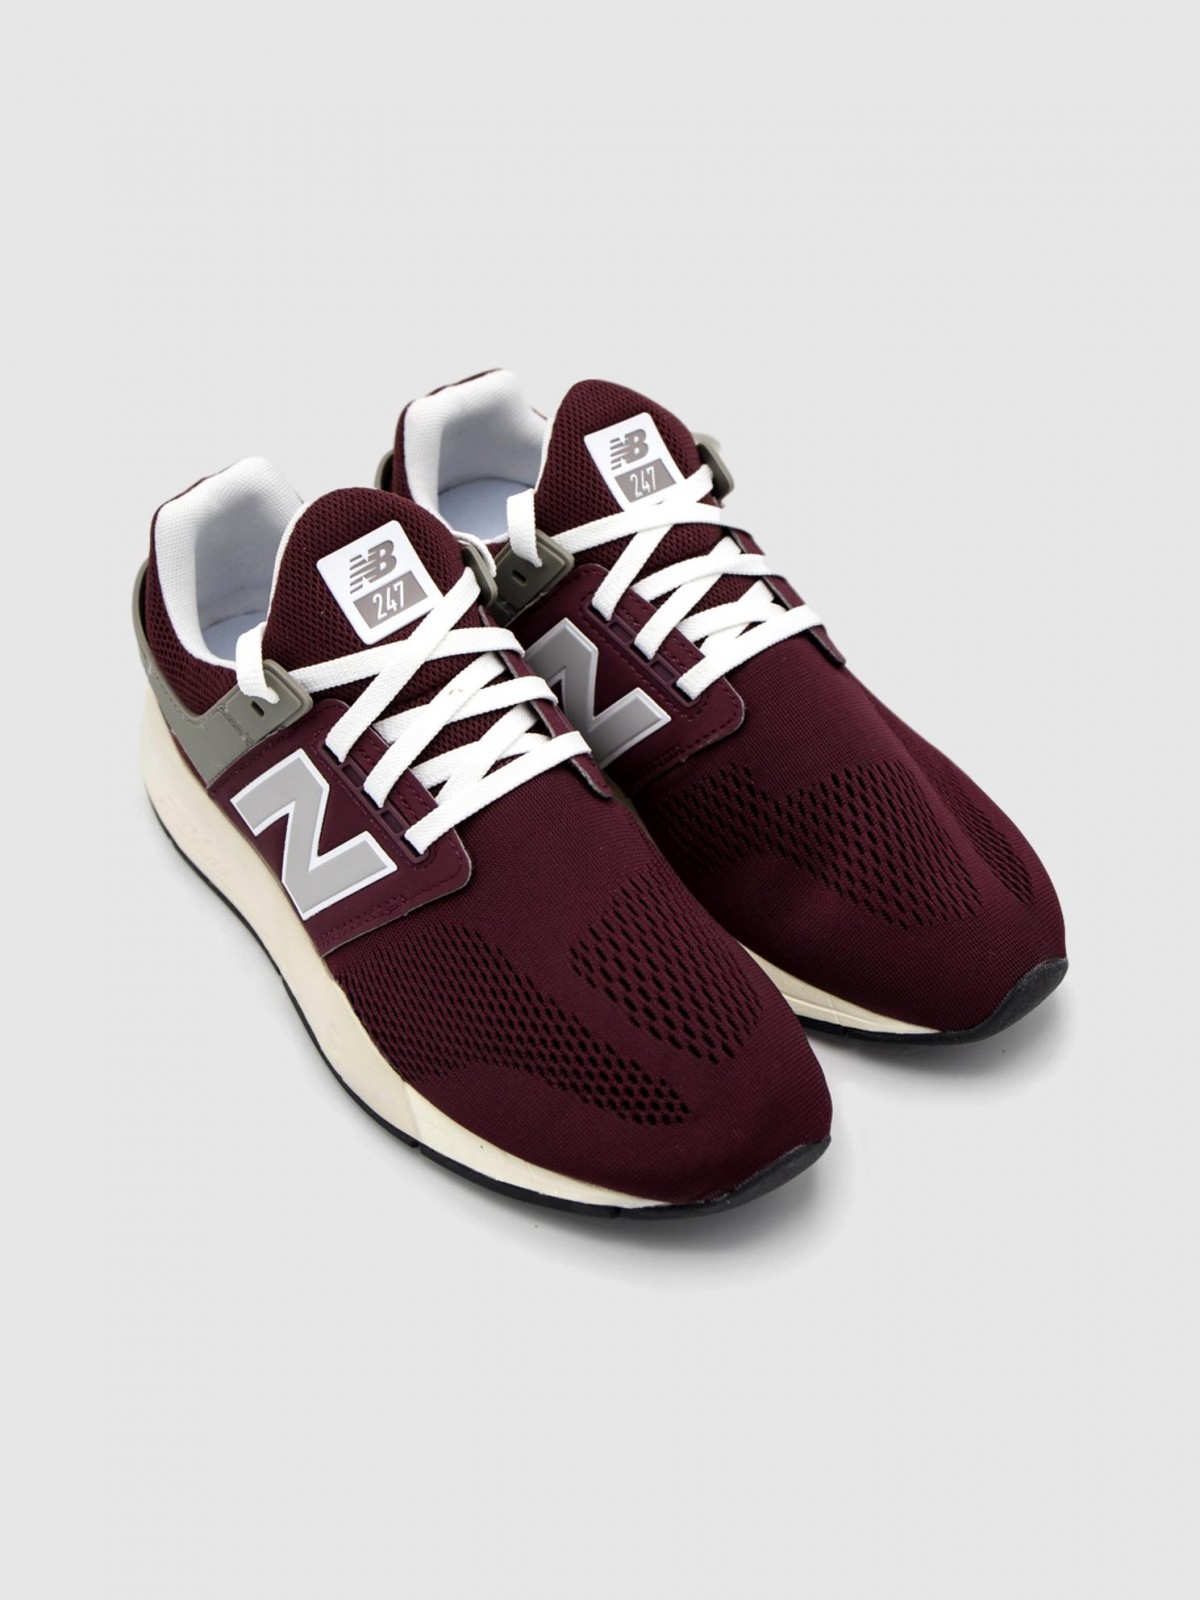 New Balance MS247MG in Bordeaux